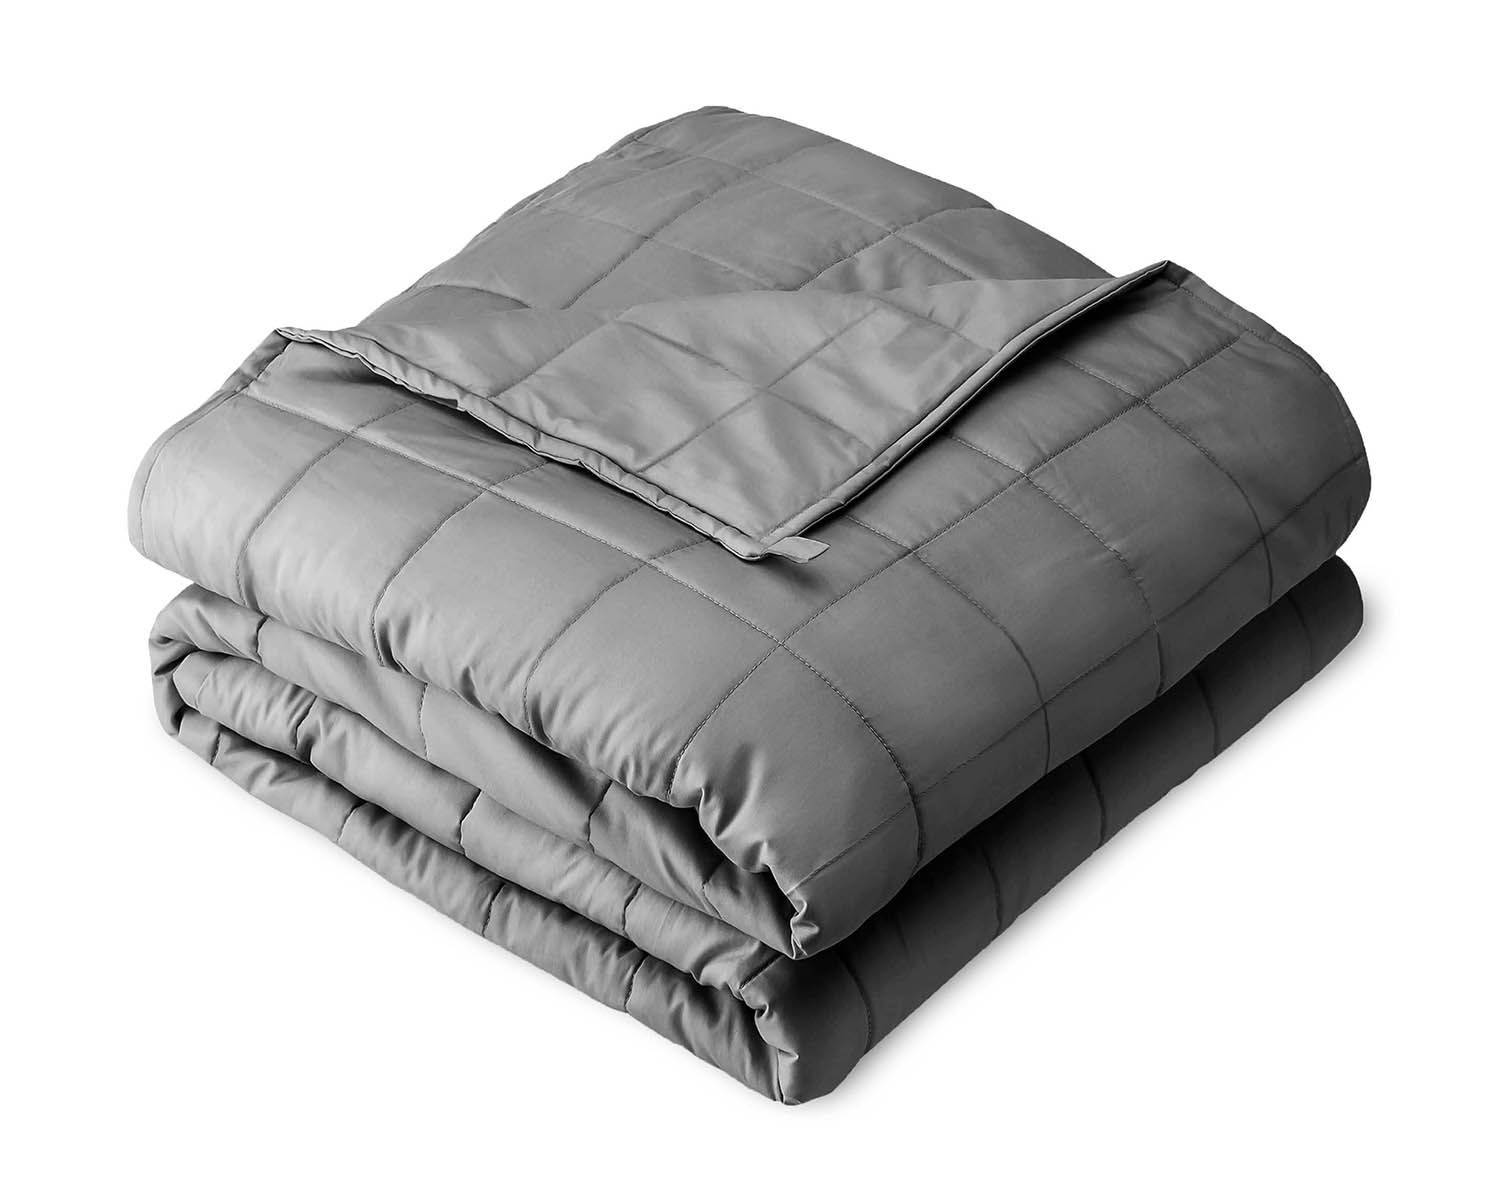 Get The Perfect Last-Minute Gift: $48 Weighted Blanket Arrives In Time For Christmas